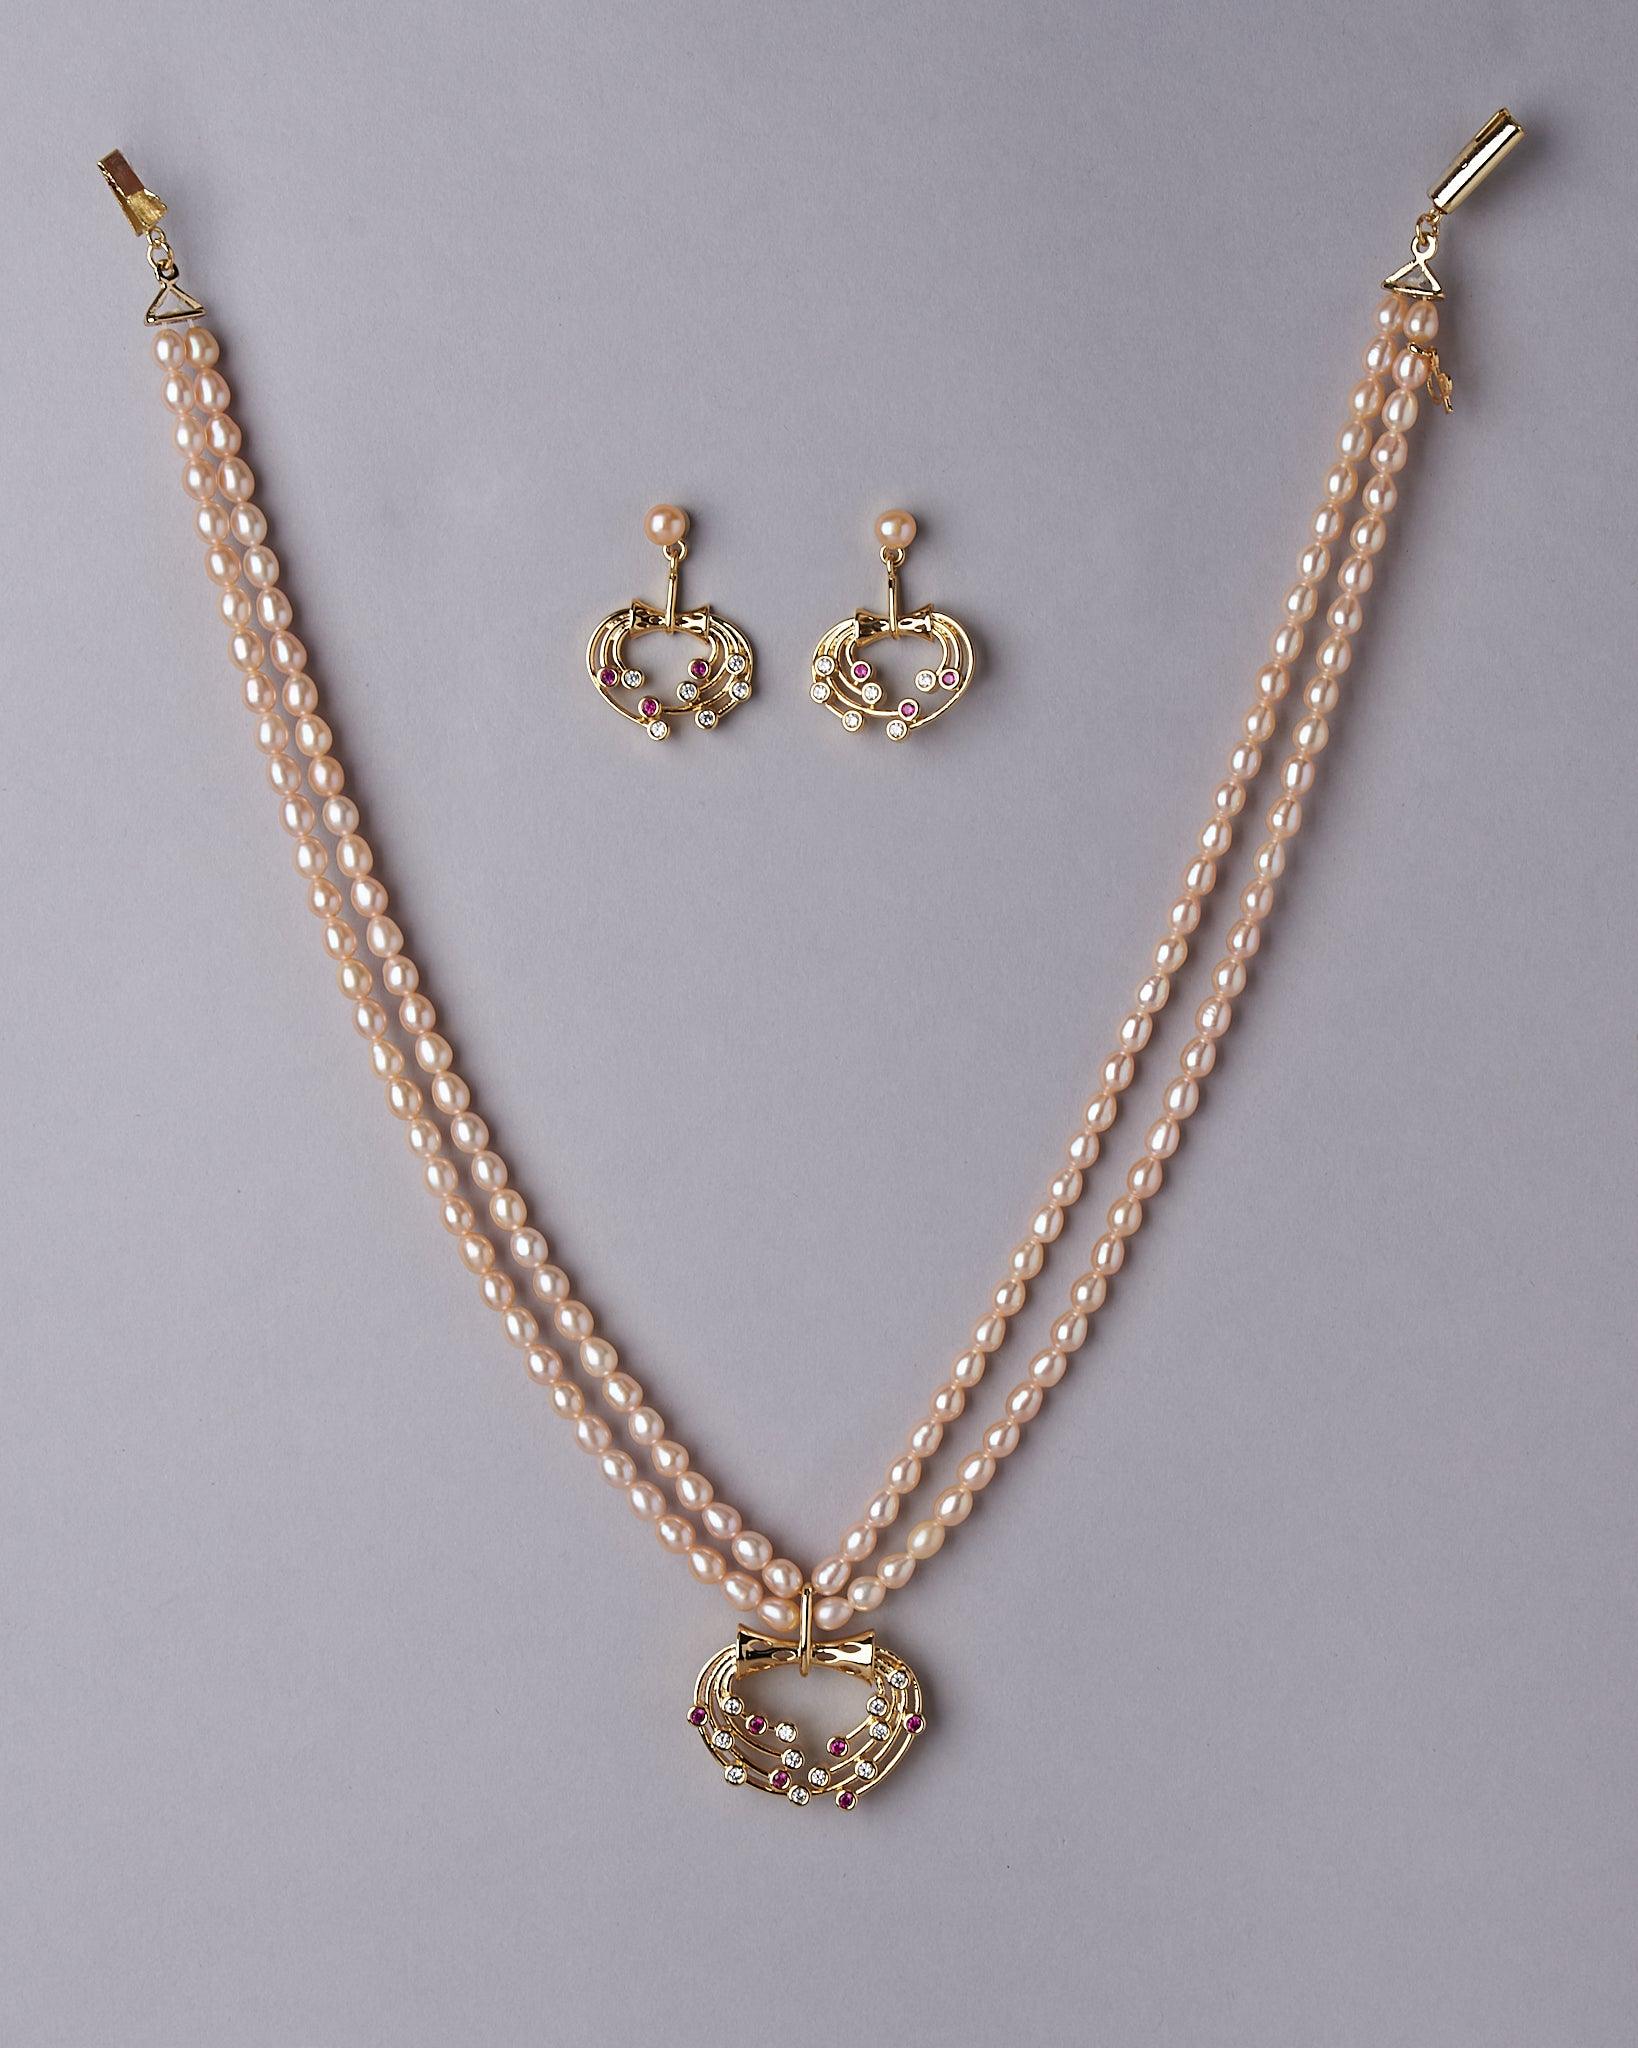 Simple and Elegant Real Pearl Necklace Set - Chandrani Pearls